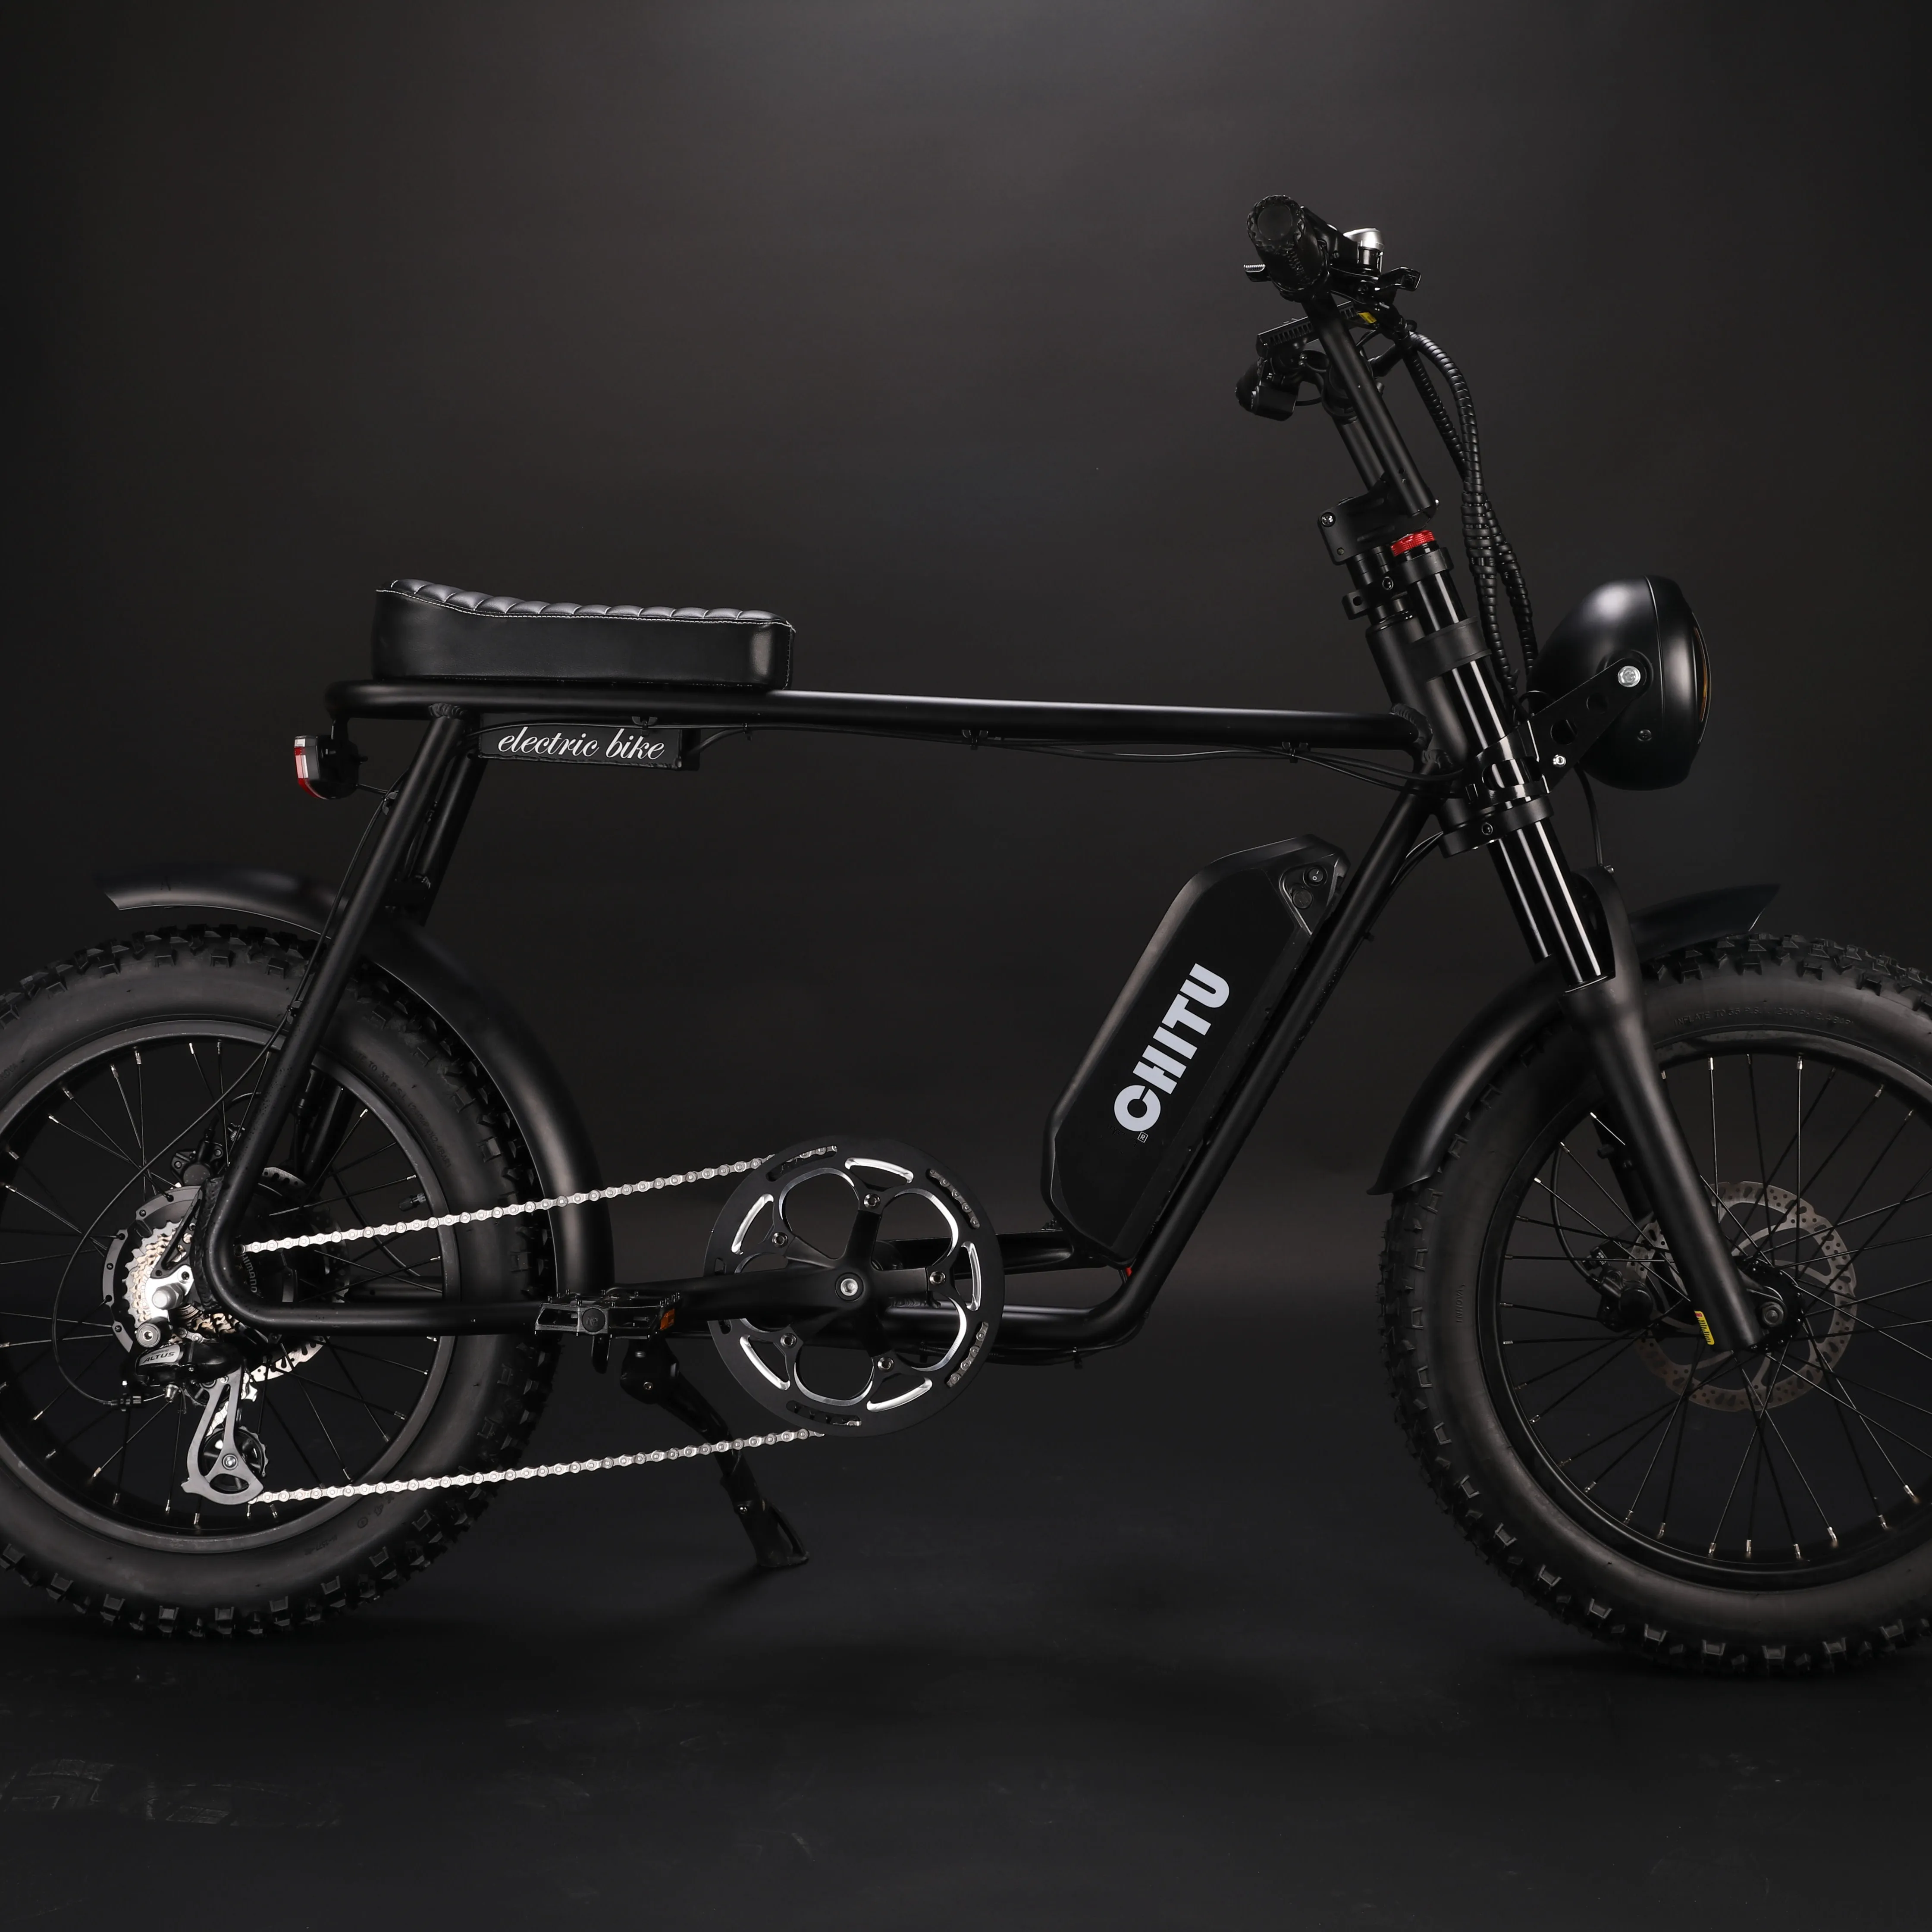 2022 Teeness speciously and hot sale 48v 500w fatbike motorcycle 20''x4 fatbike/snowbike electric bicycle